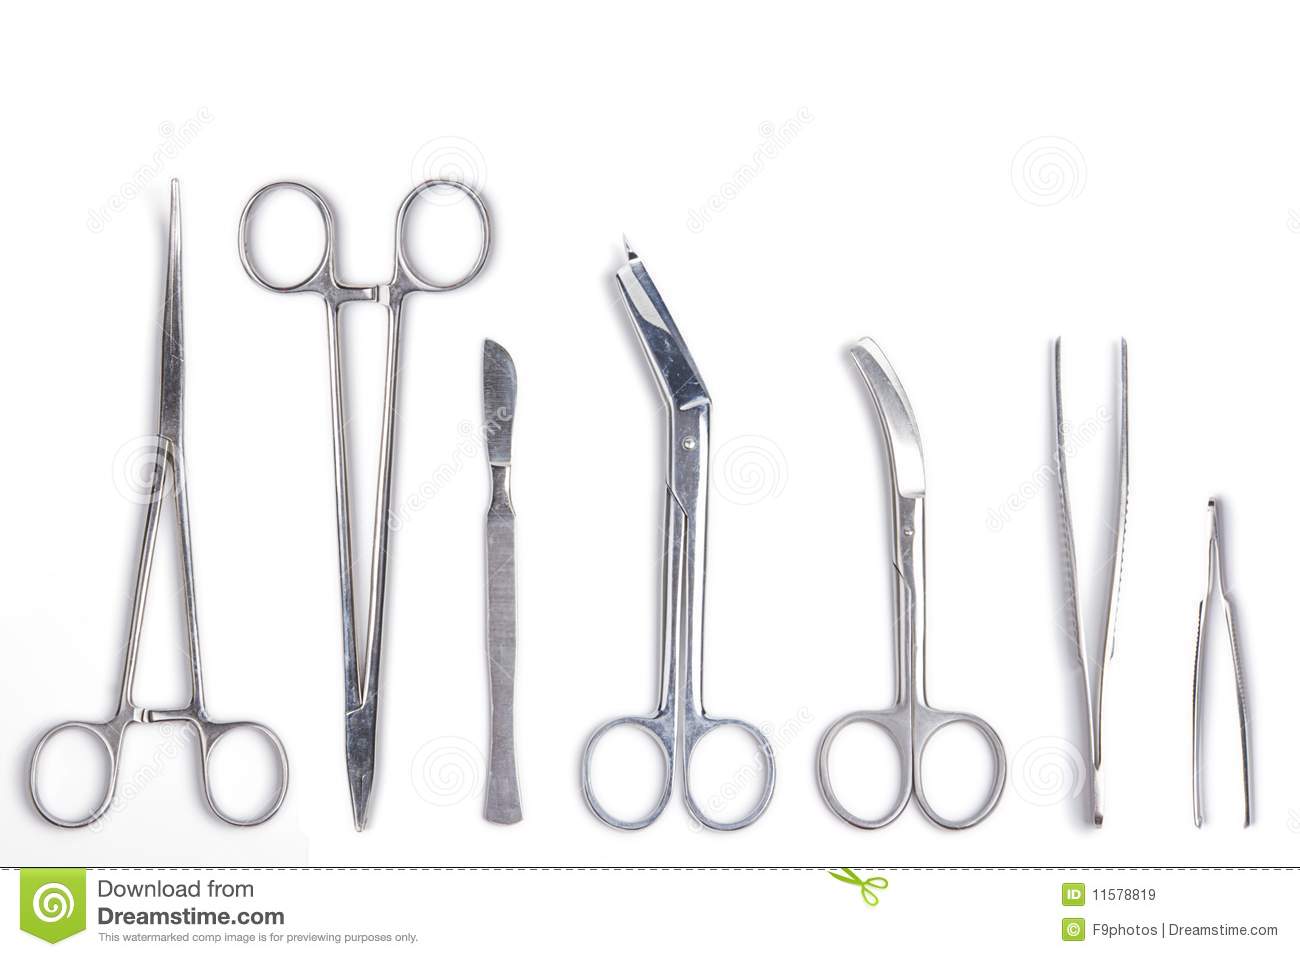 Surgeon Tools   Scalpel Forceps Clamps Scissors   Isolated On White    